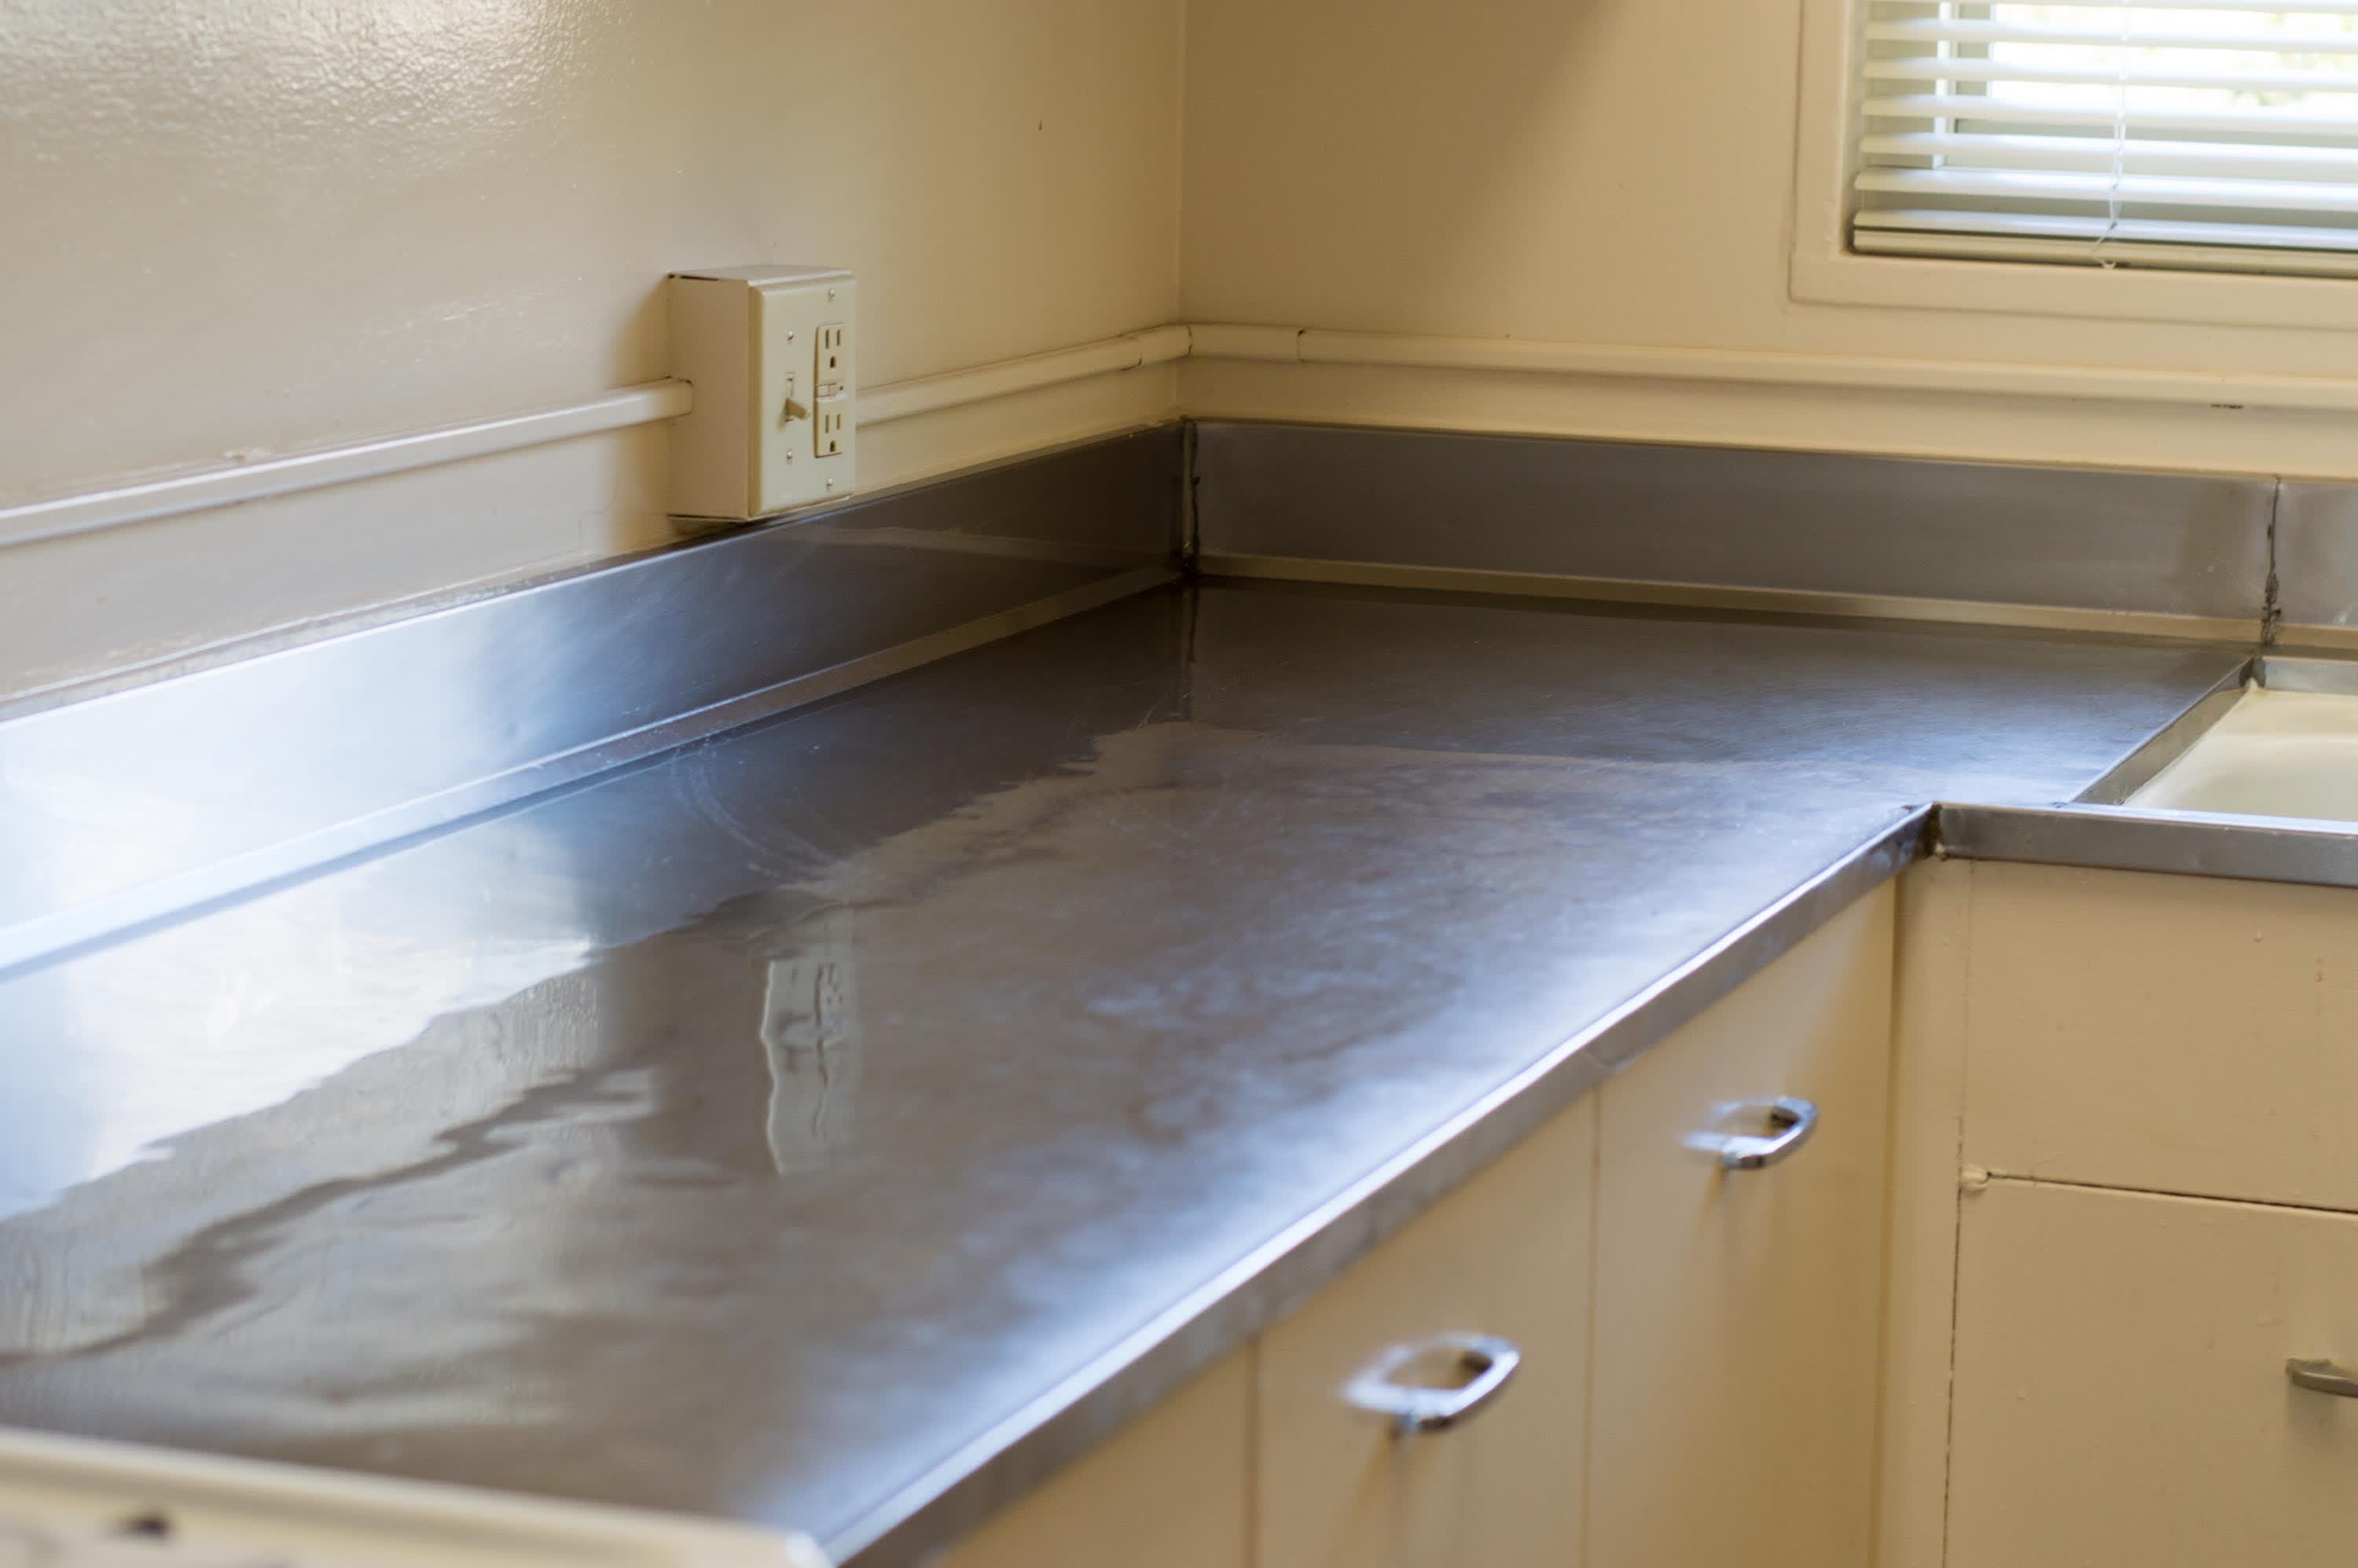 How To Clean Stainless Steel Countertops To A Shiny Streak Free